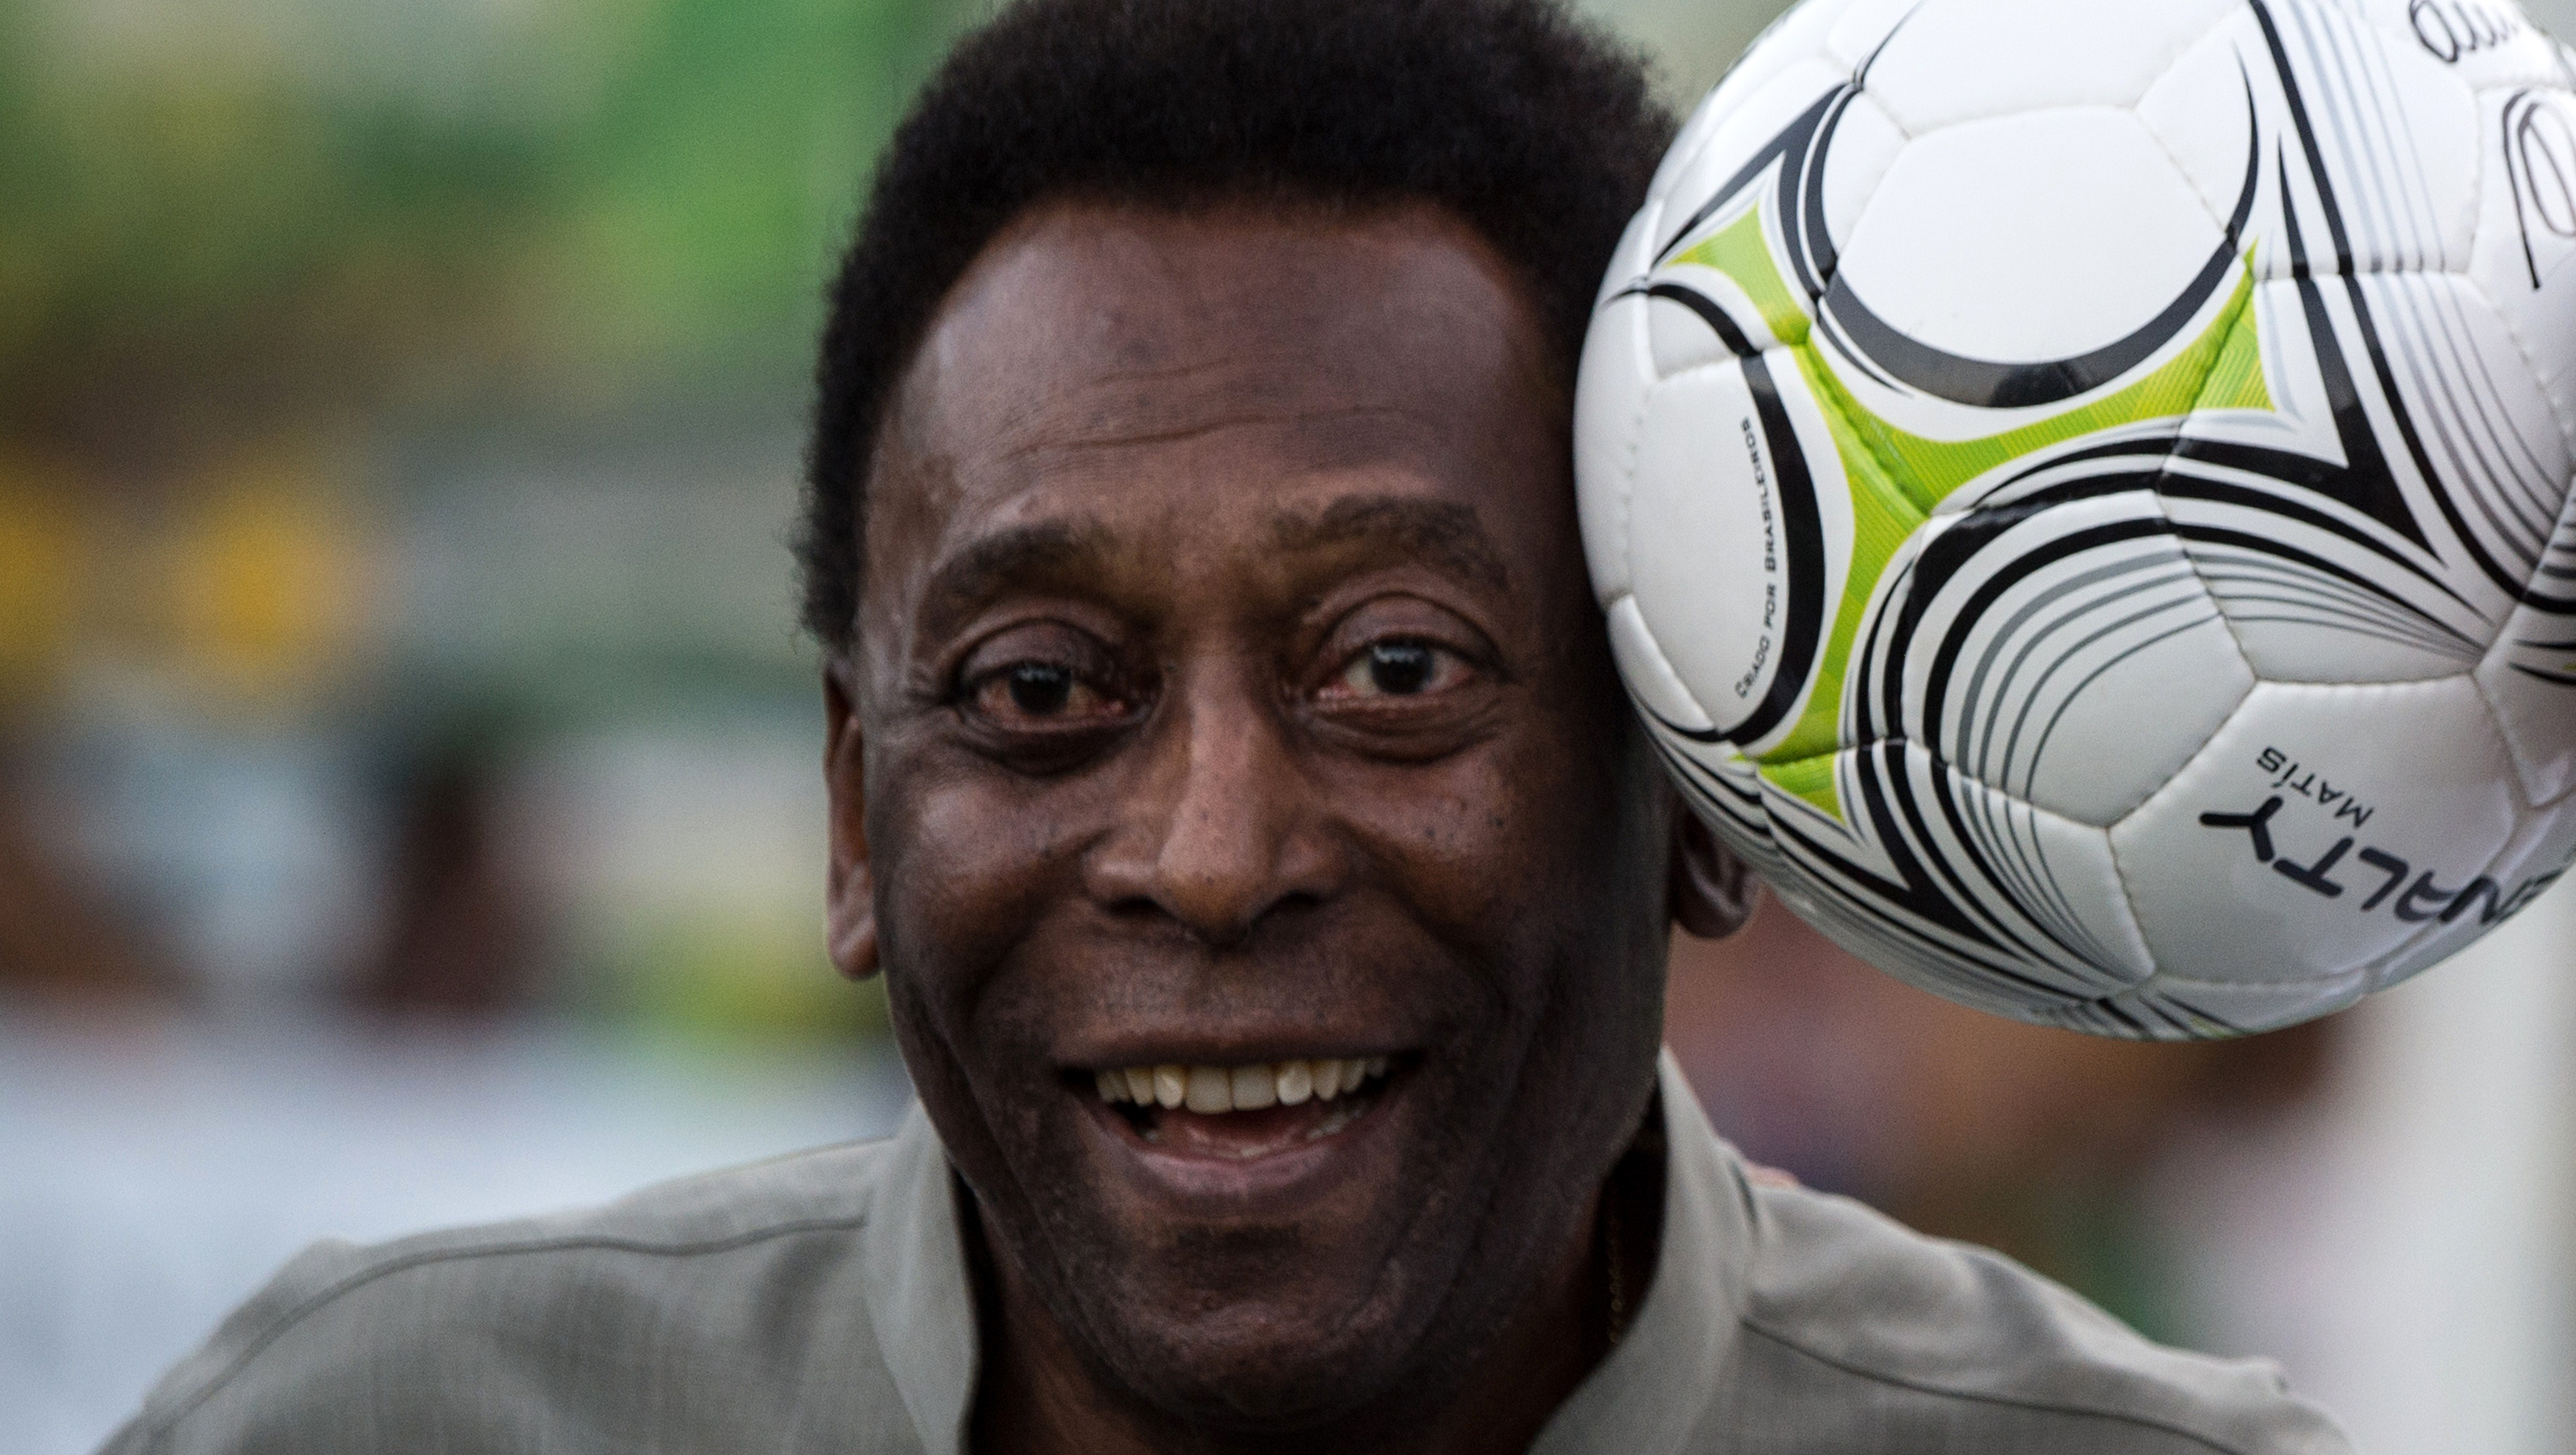 Pele "lucid," condition improving in Brazil hospital, officials say